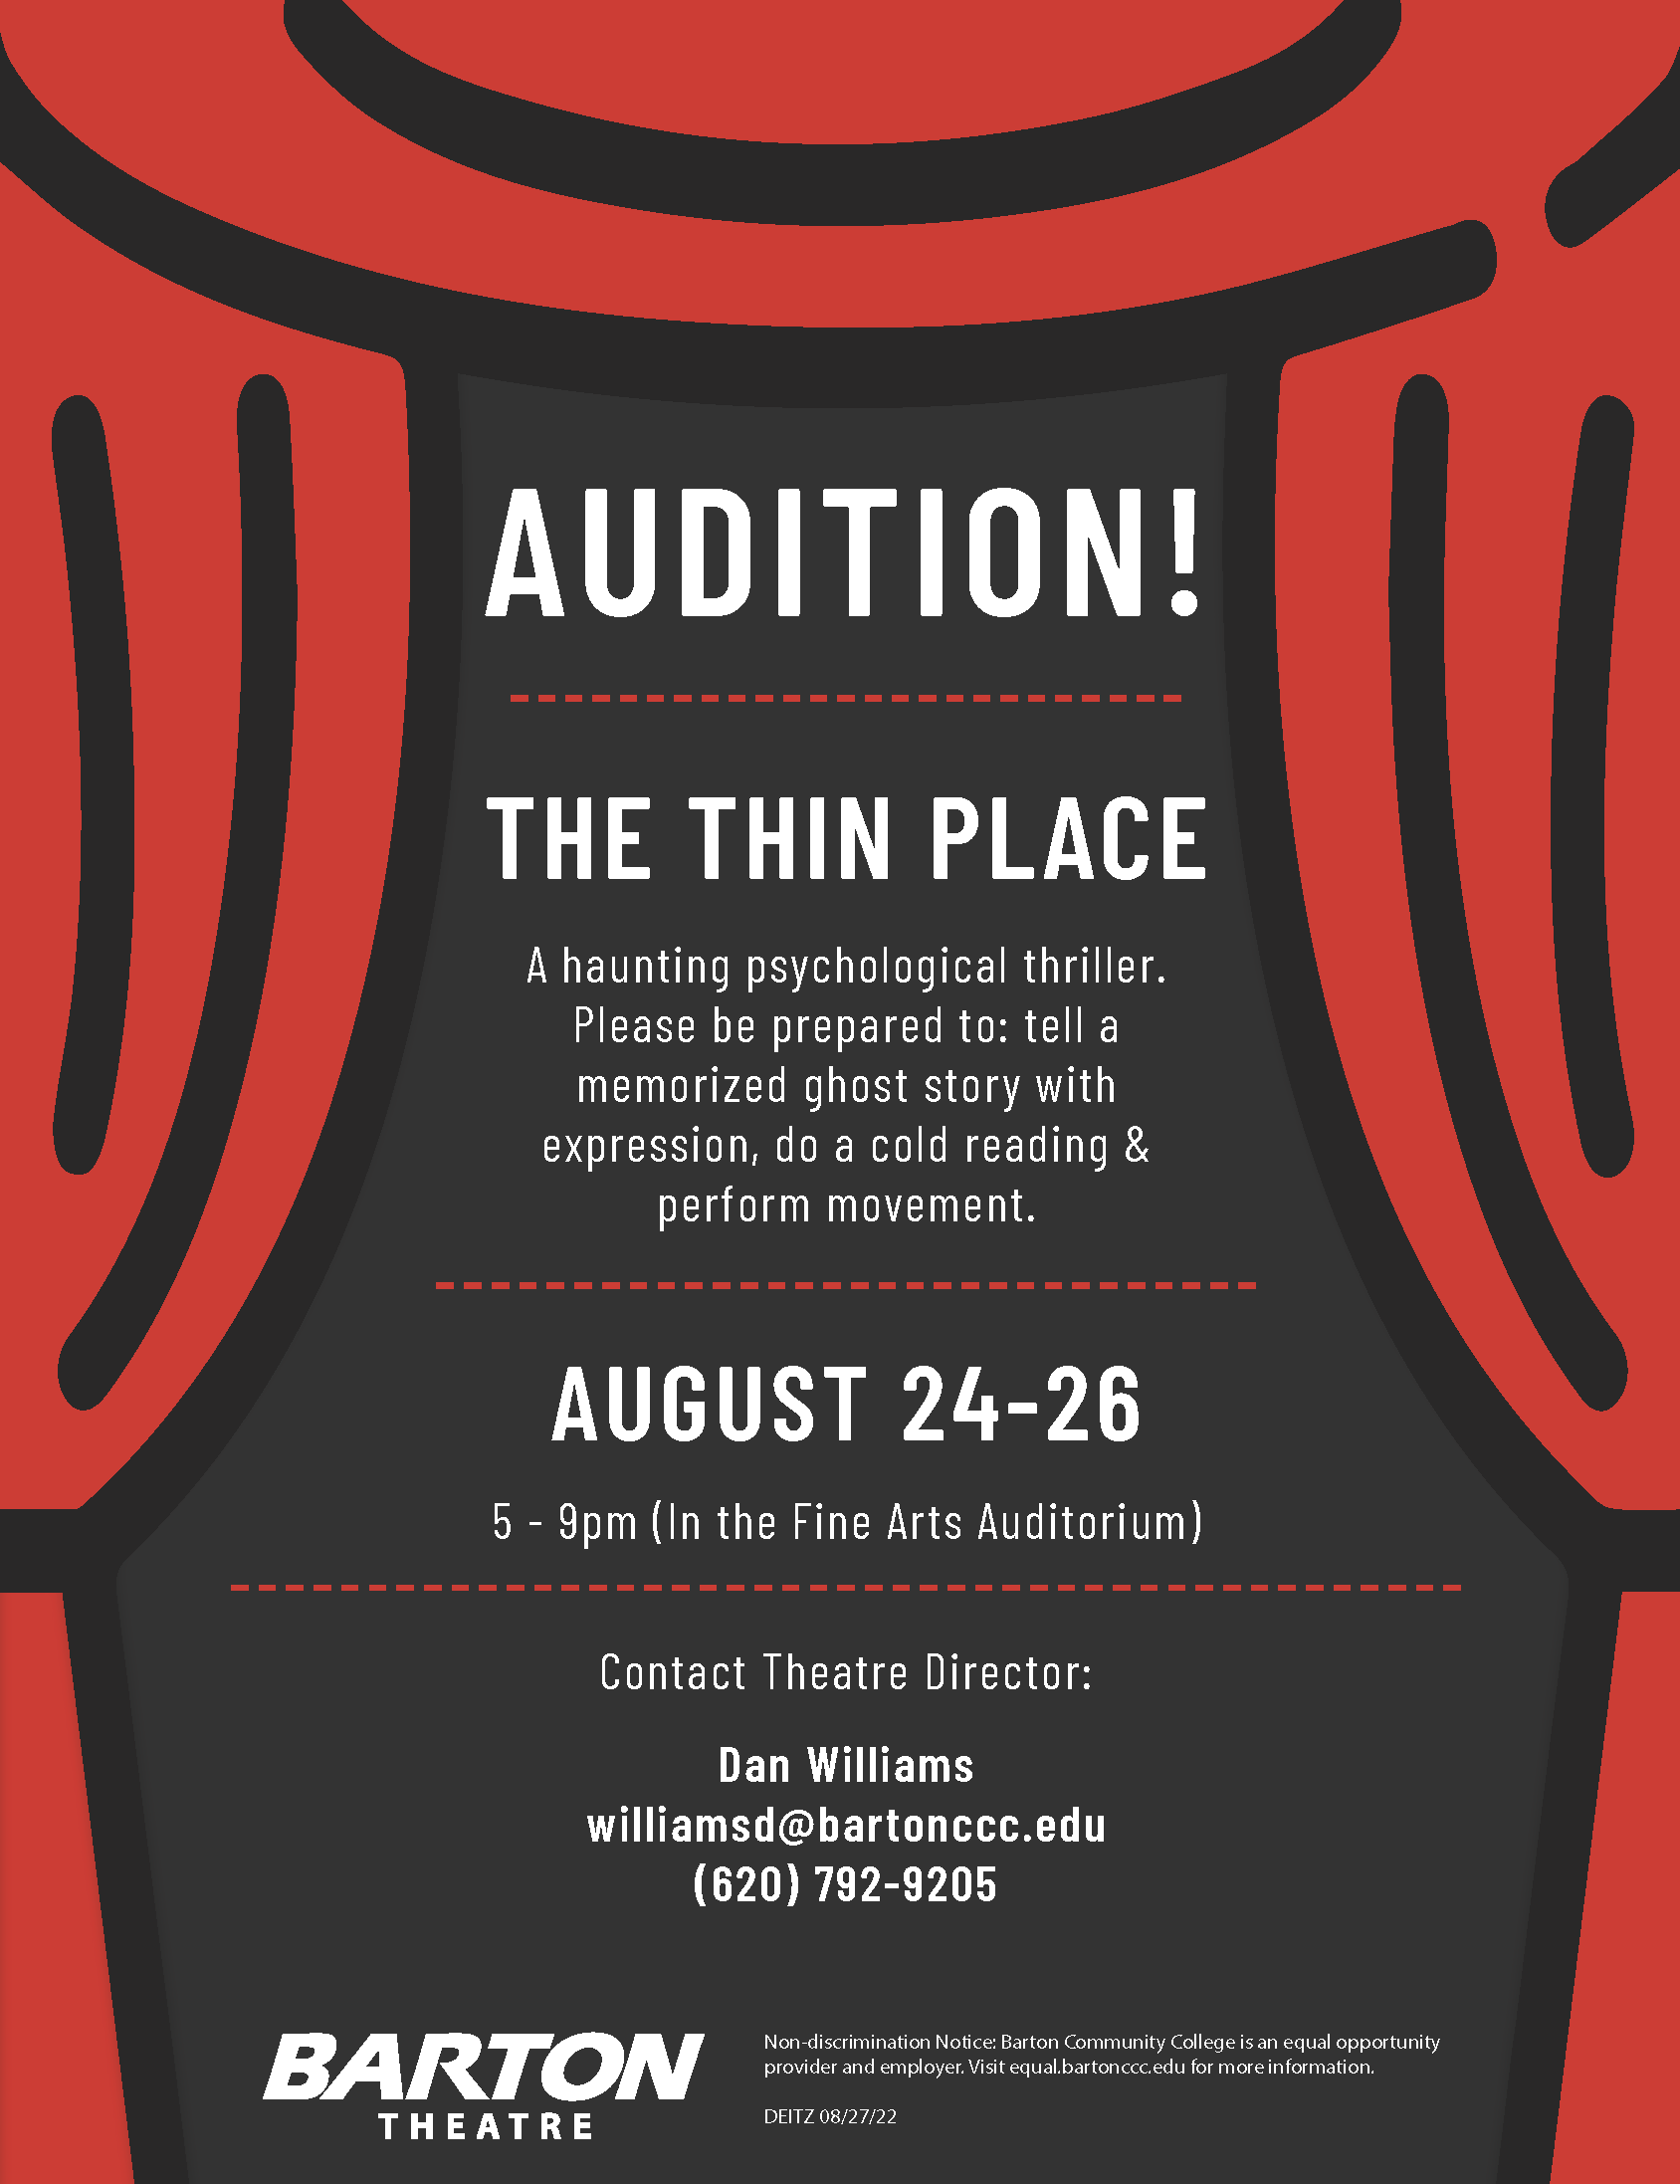 a flier for auditions with a red curtain